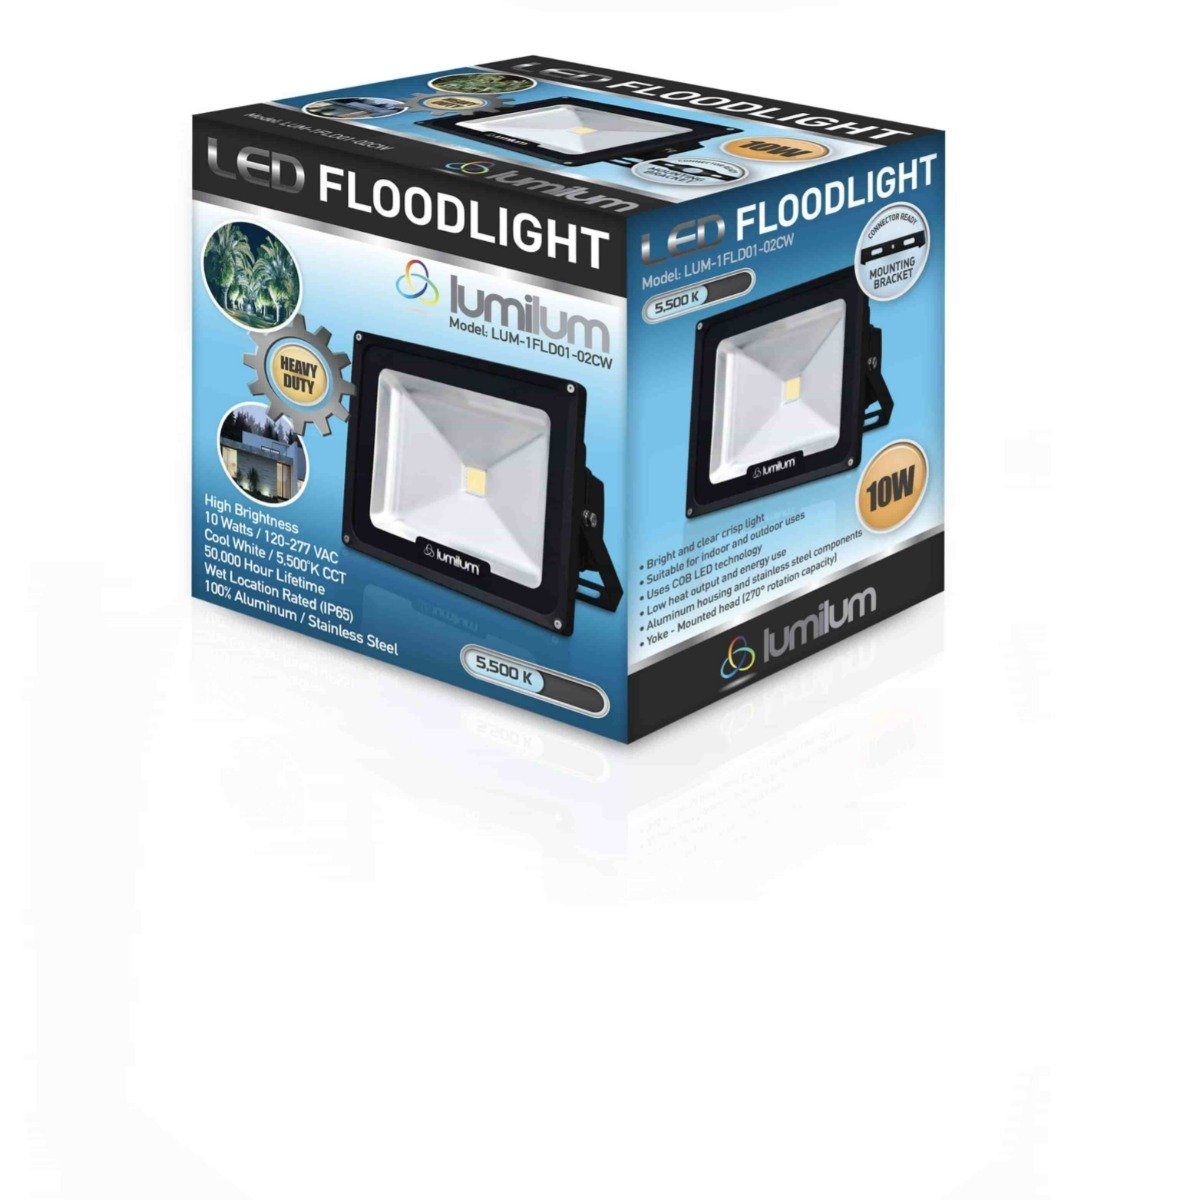 led flood light box with sky blue gradient and black highlights with small led flood light image